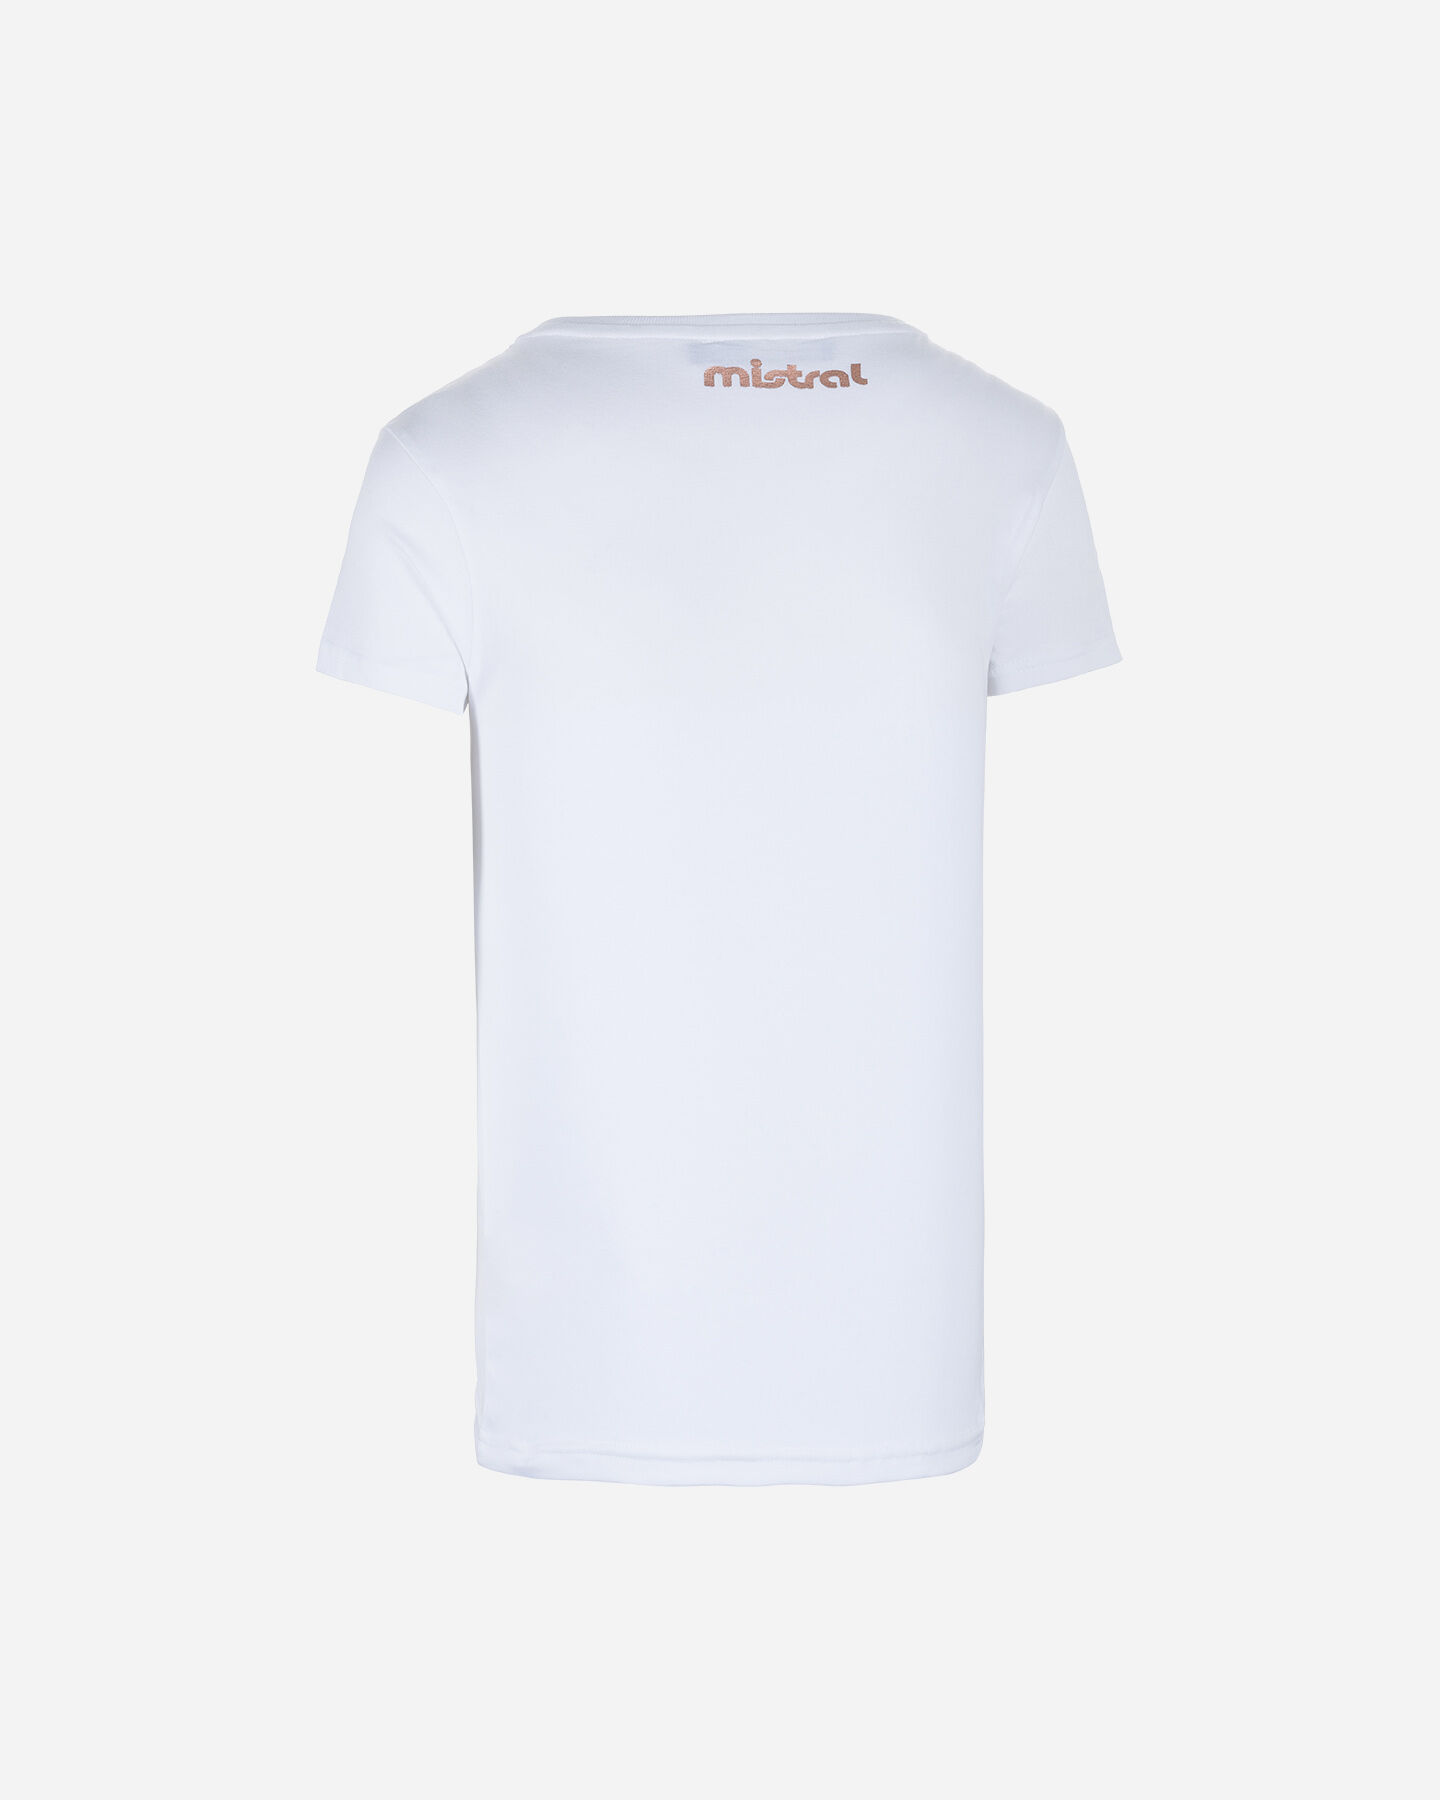  T-Shirt MISTRAL LOGO W S4074078|001|S scatto 1